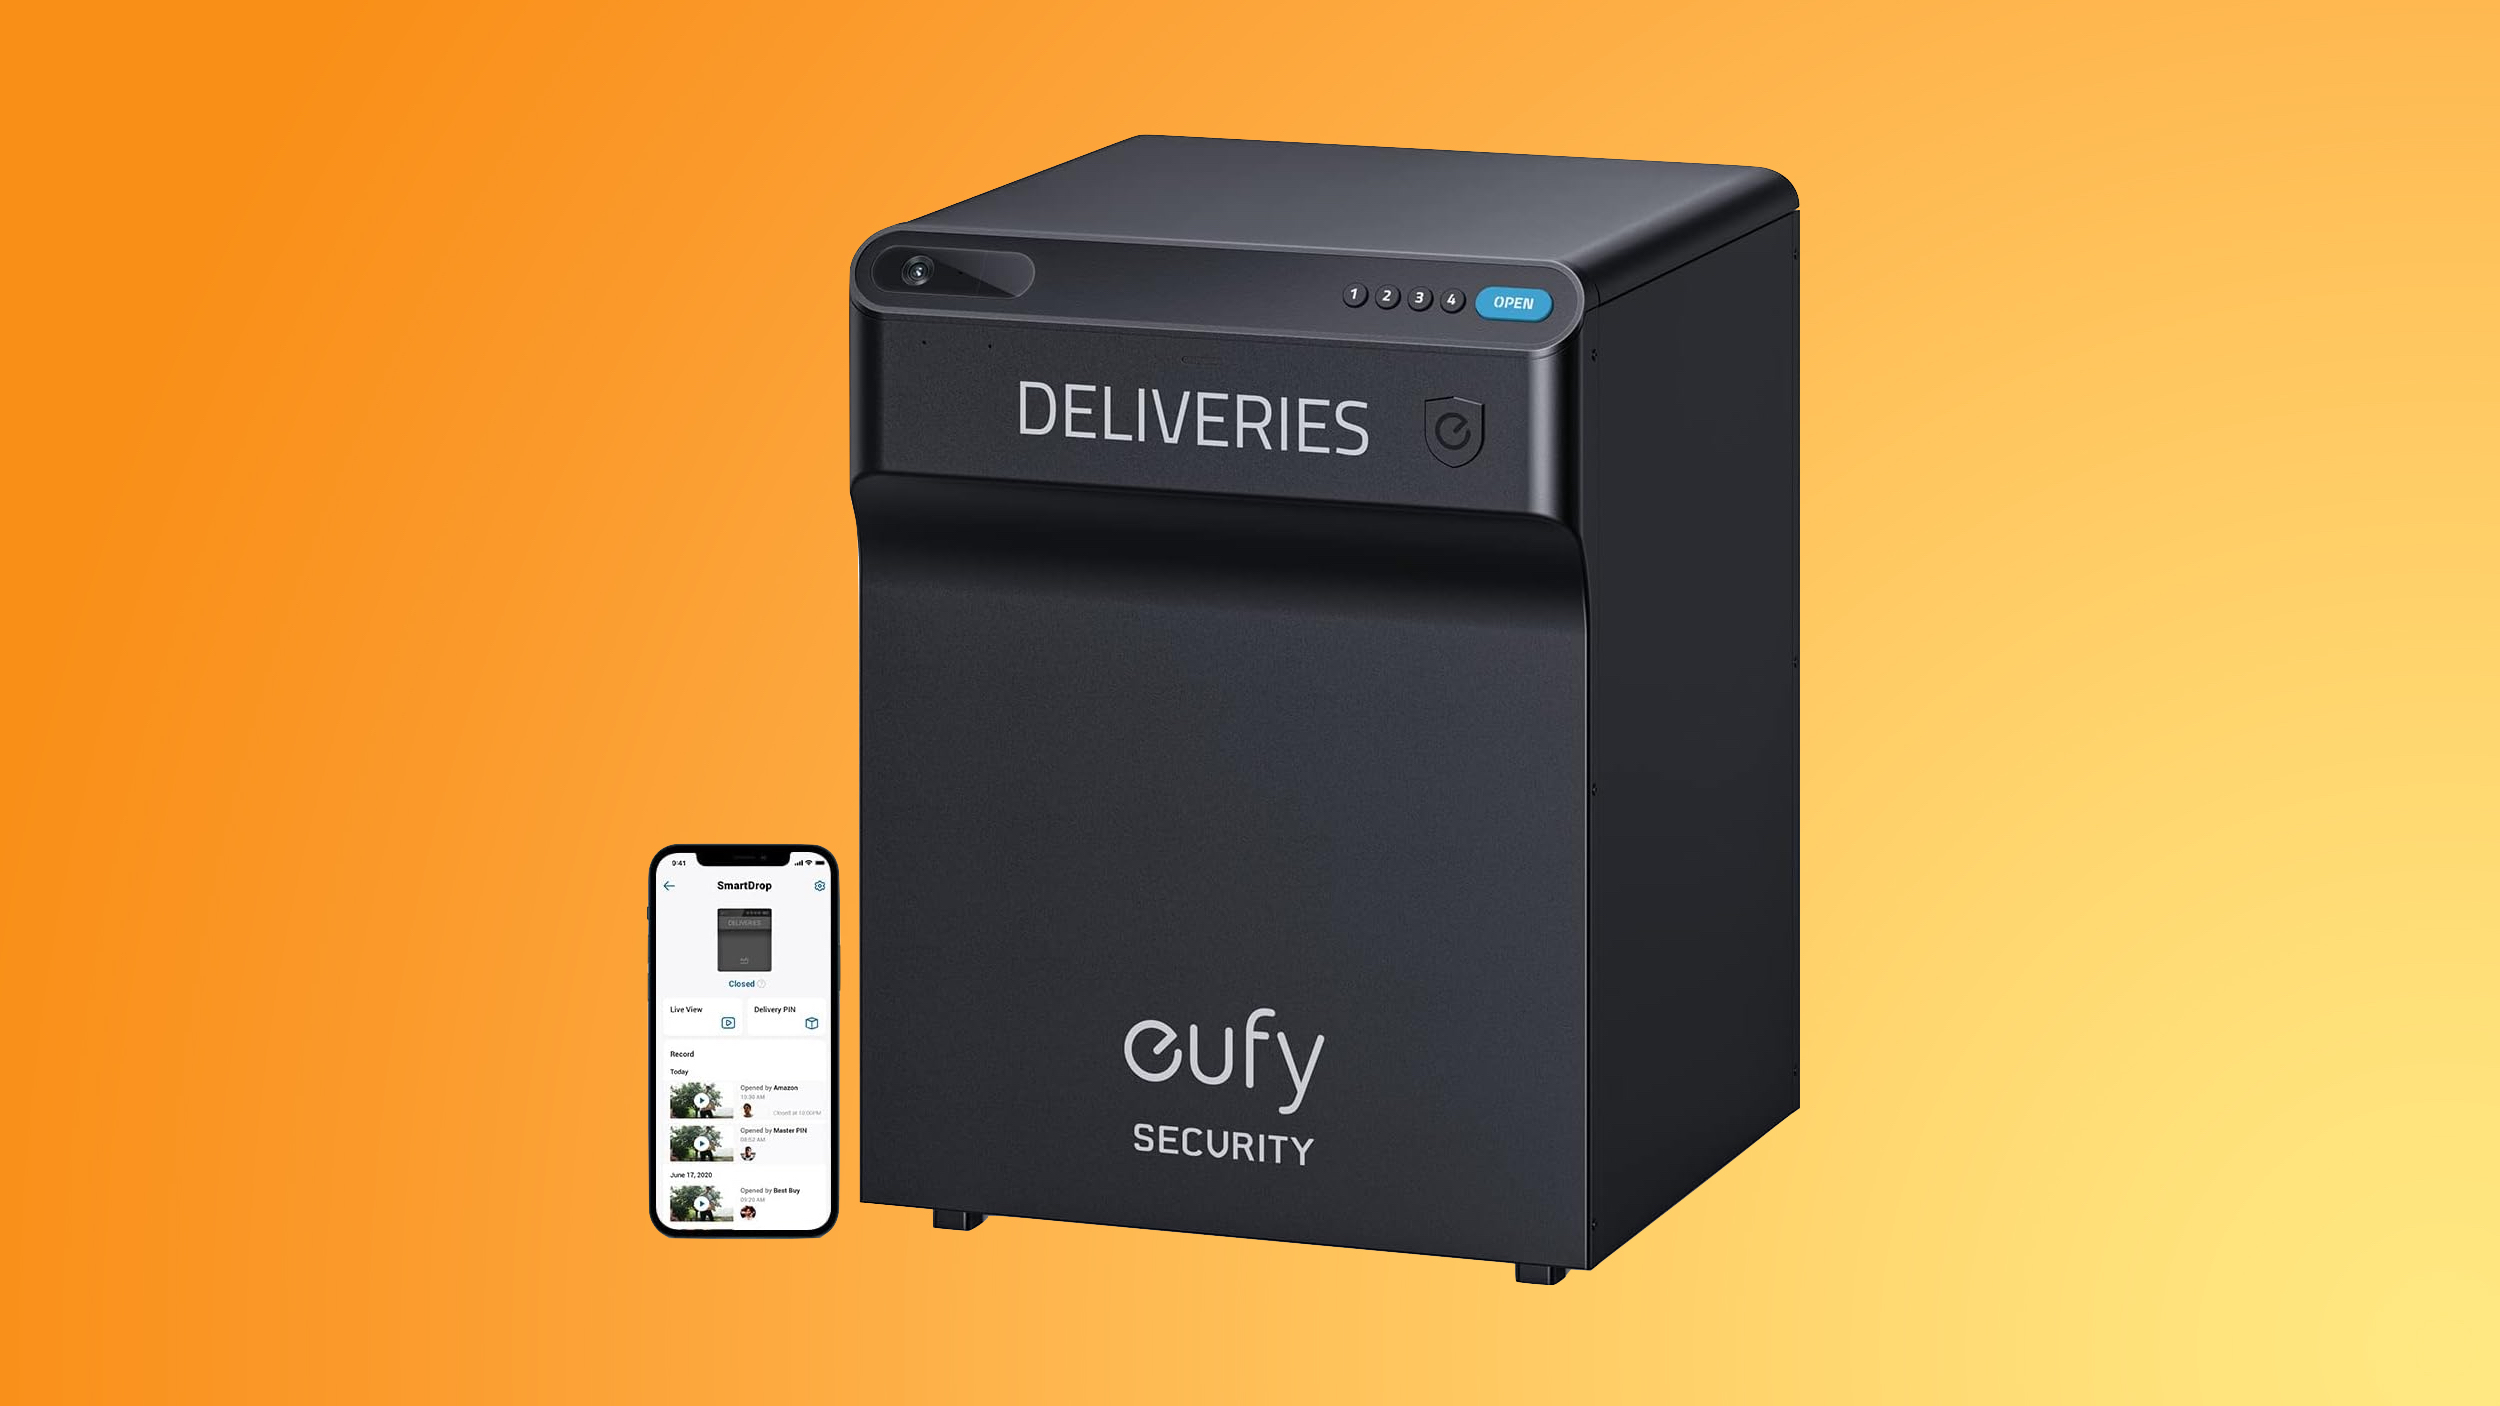 Deals Anker’s Latest Sales Include 200 Off the Eufy SmartDrop Package